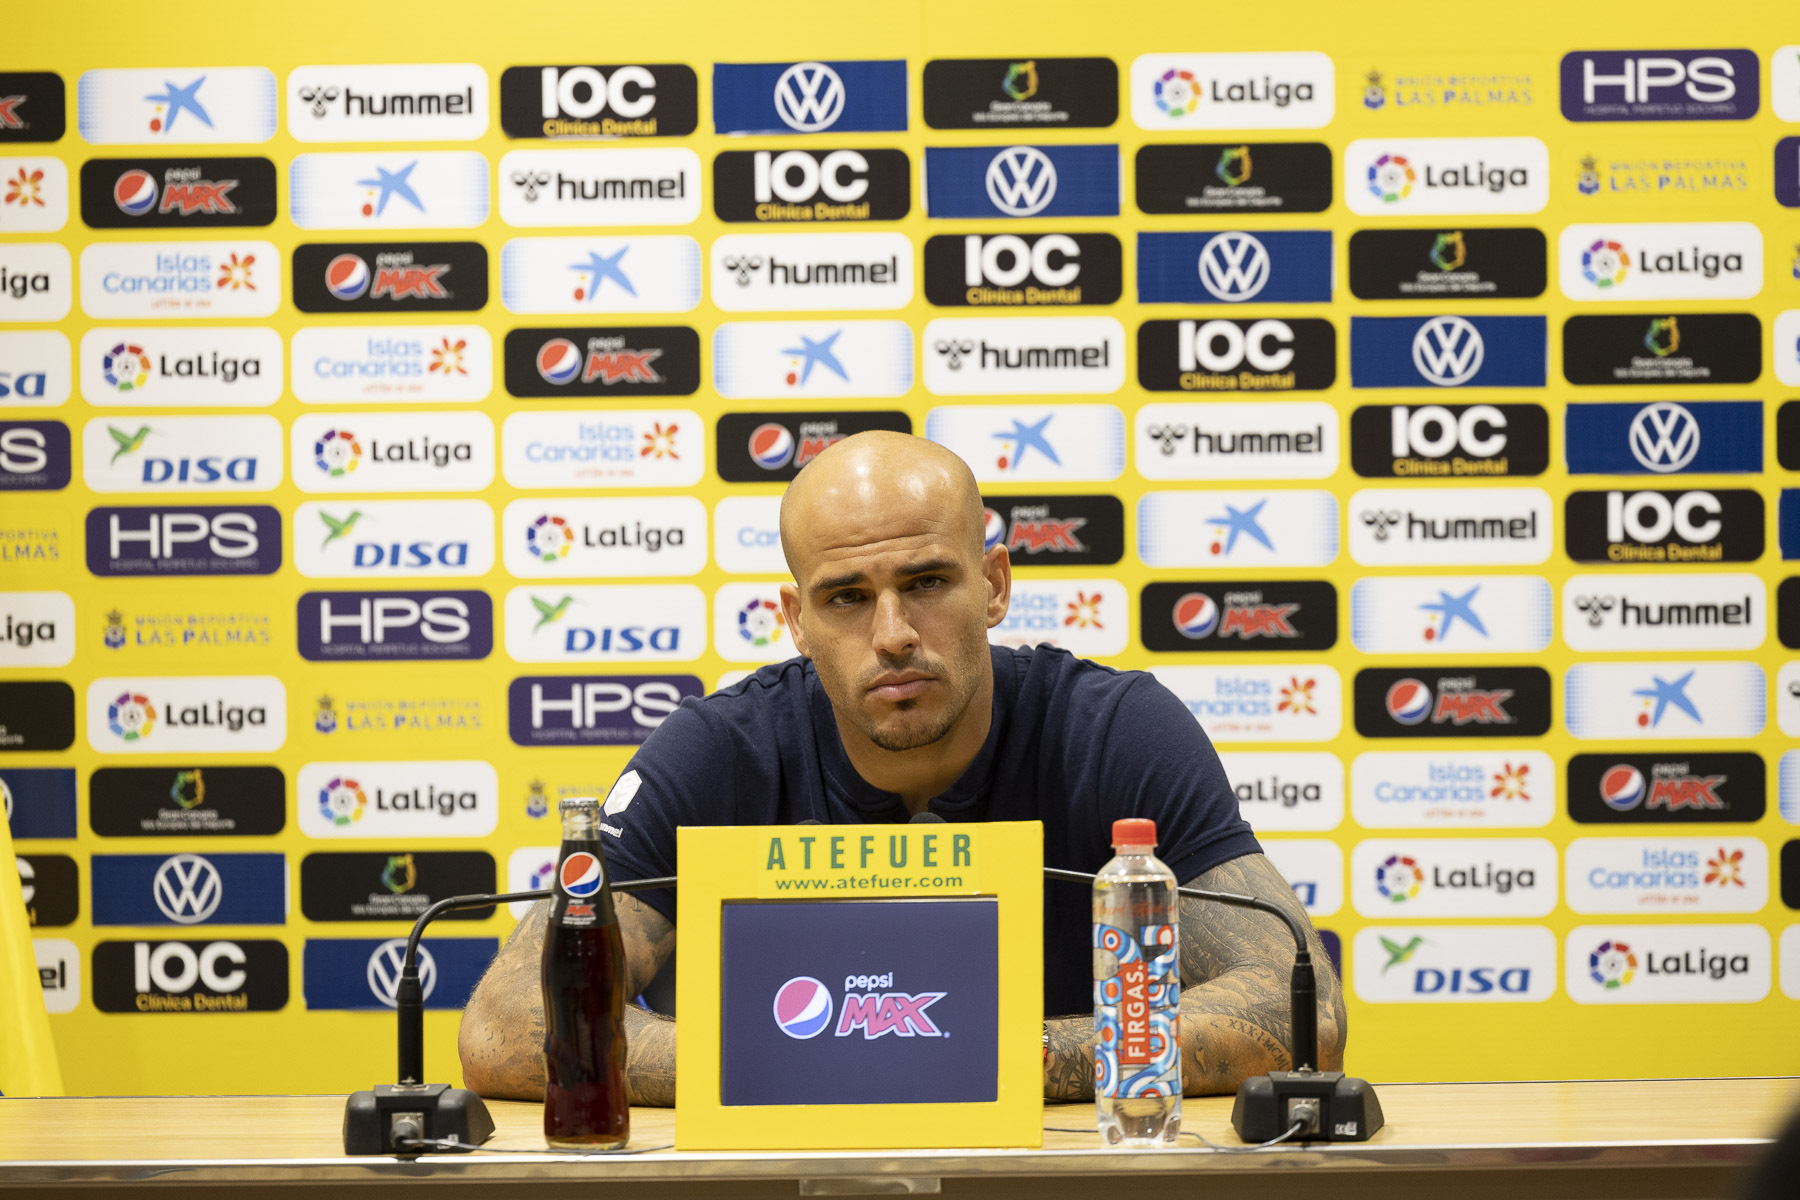 Sandro Ramírez: I'd give up everything to promote with the team of my life.